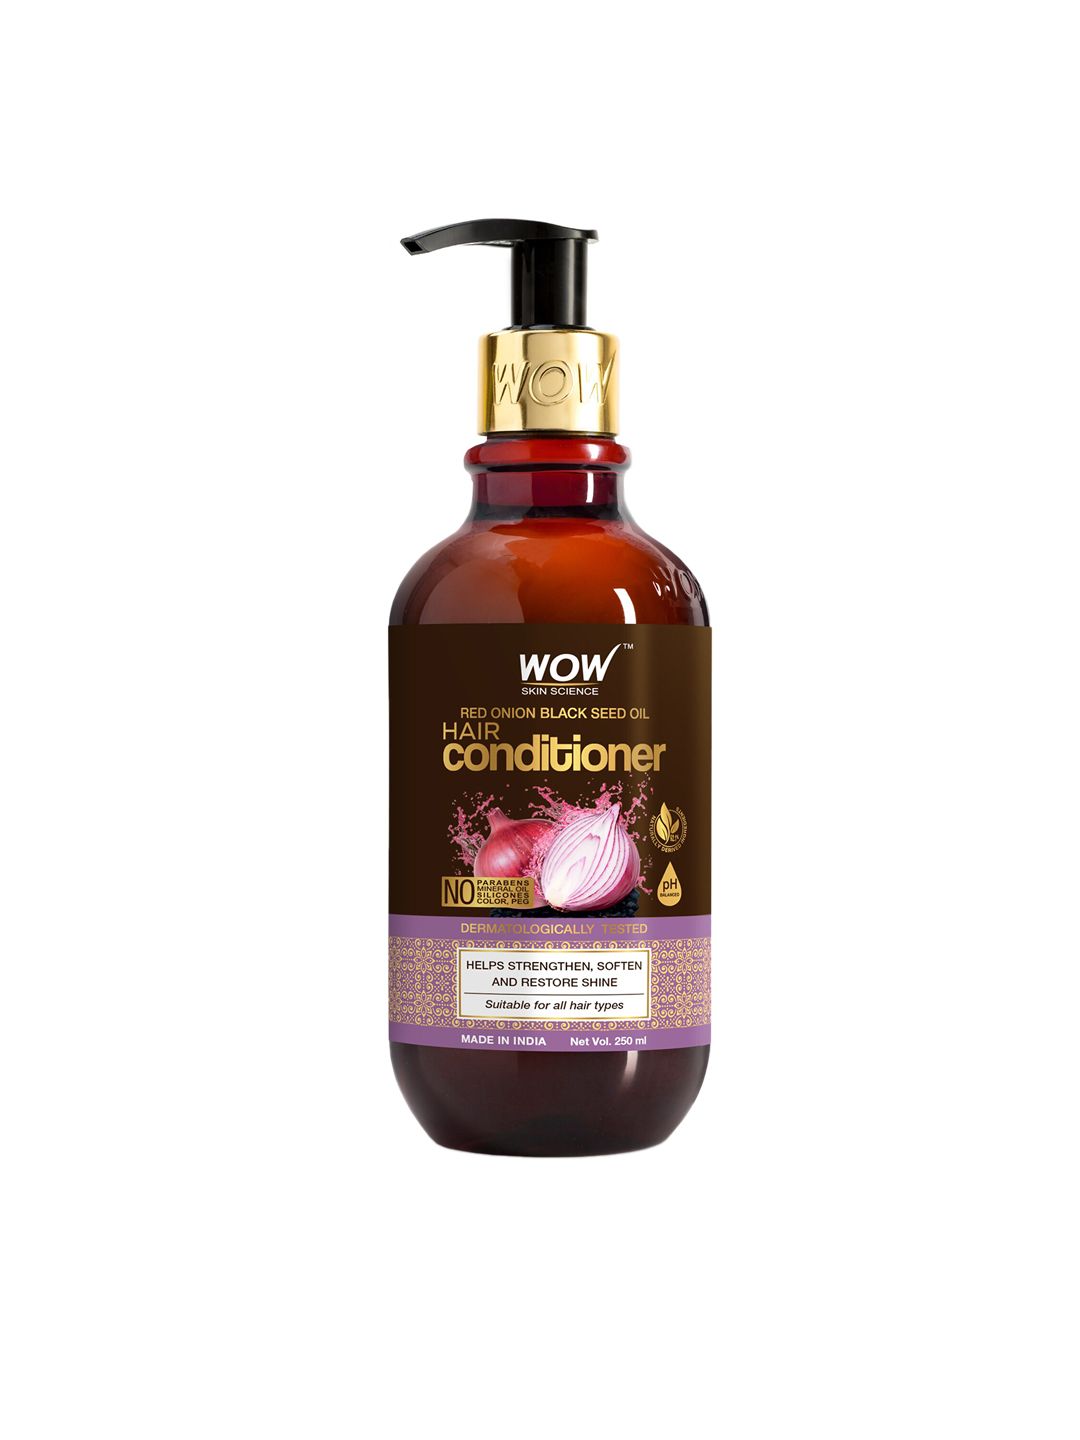 WOW SKIN SCIENCE Red Onion & Black Seed Oil Hair Conditioner 250ml Price in India